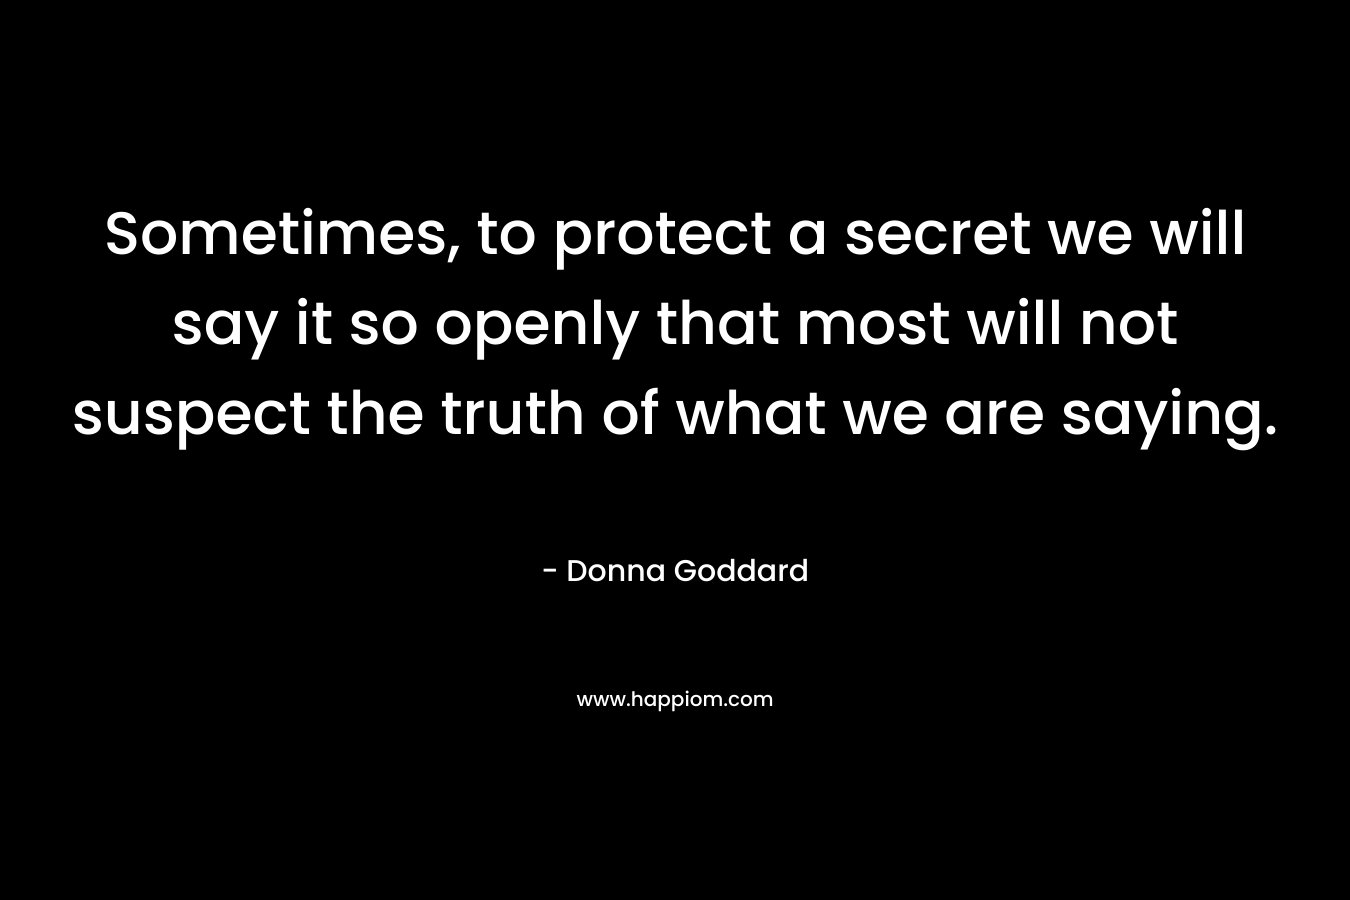 Sometimes, to protect a secret we will say it so openly that most will not suspect the truth of what we are saying.